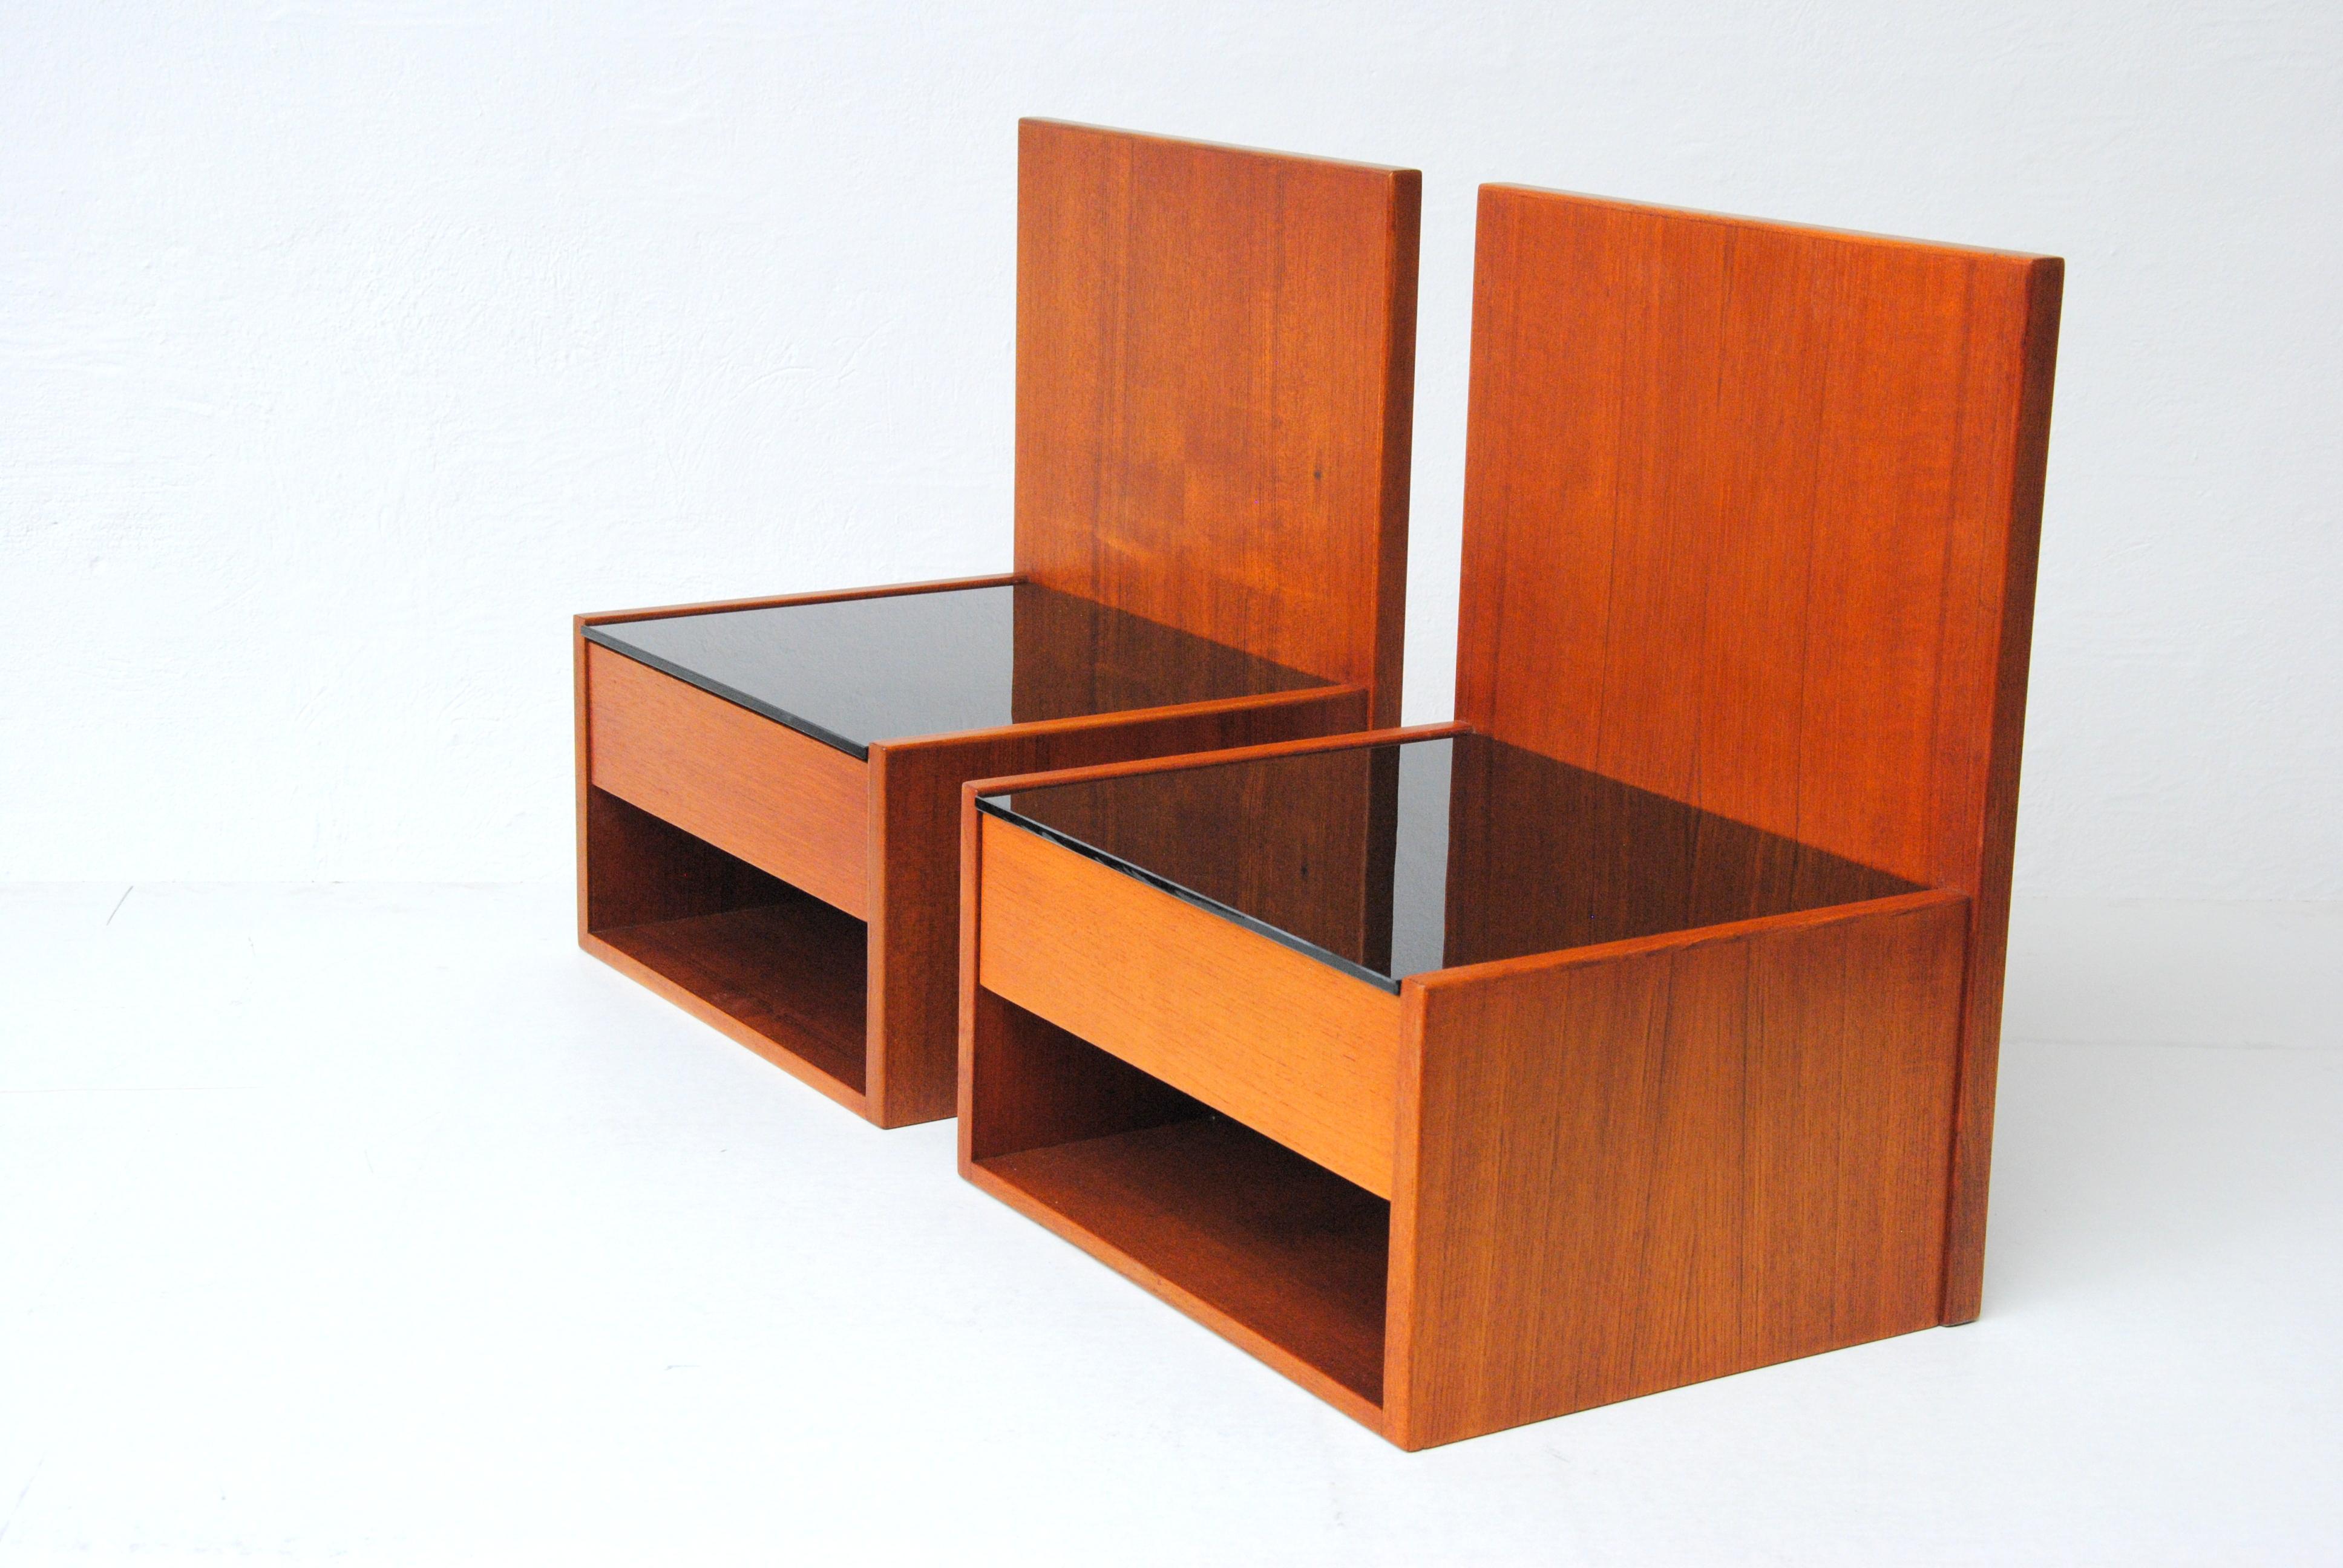 1960's Hans Wegner Set of two floating nightstands in teak and glass by Getama.

The set of floating night stands or shelves in teak, each feature a single drawer with a hidden carved handle, open storage compartment beneath and a black glass table